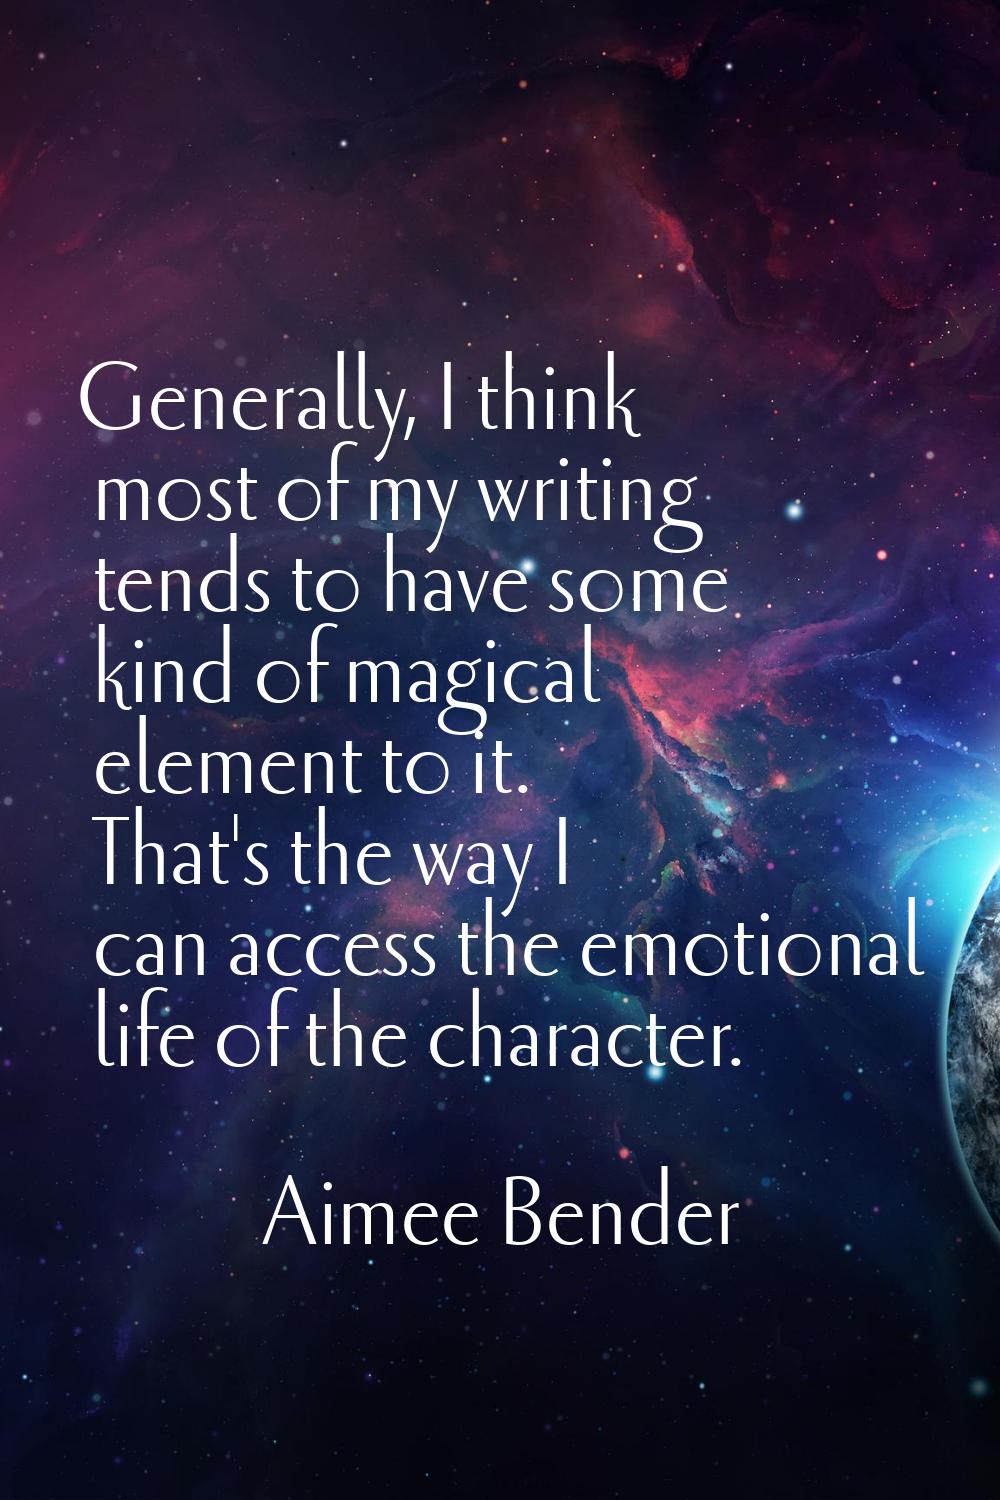 Generally, I think most of my writing tends to have some kind of magical element to it. That's the 